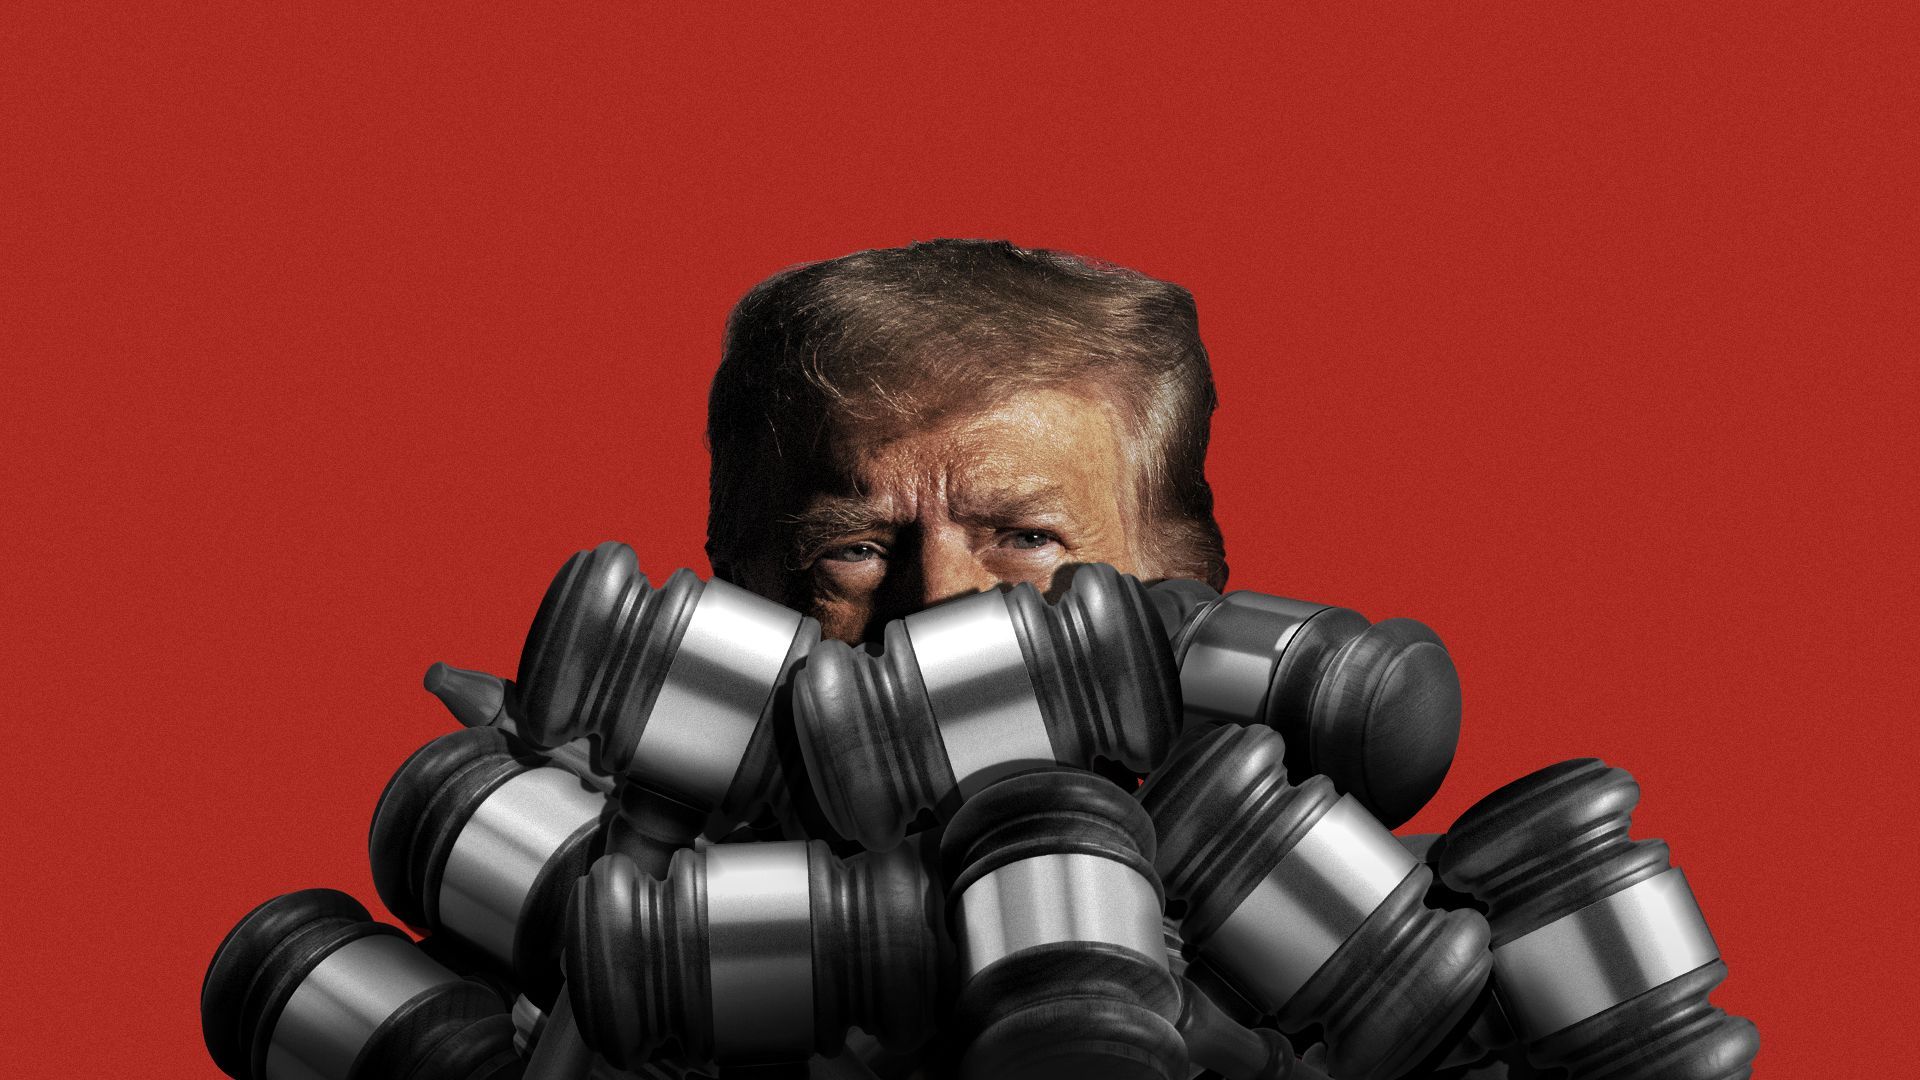 Illustration of Donald' Trump peeking from a pile of gavels.